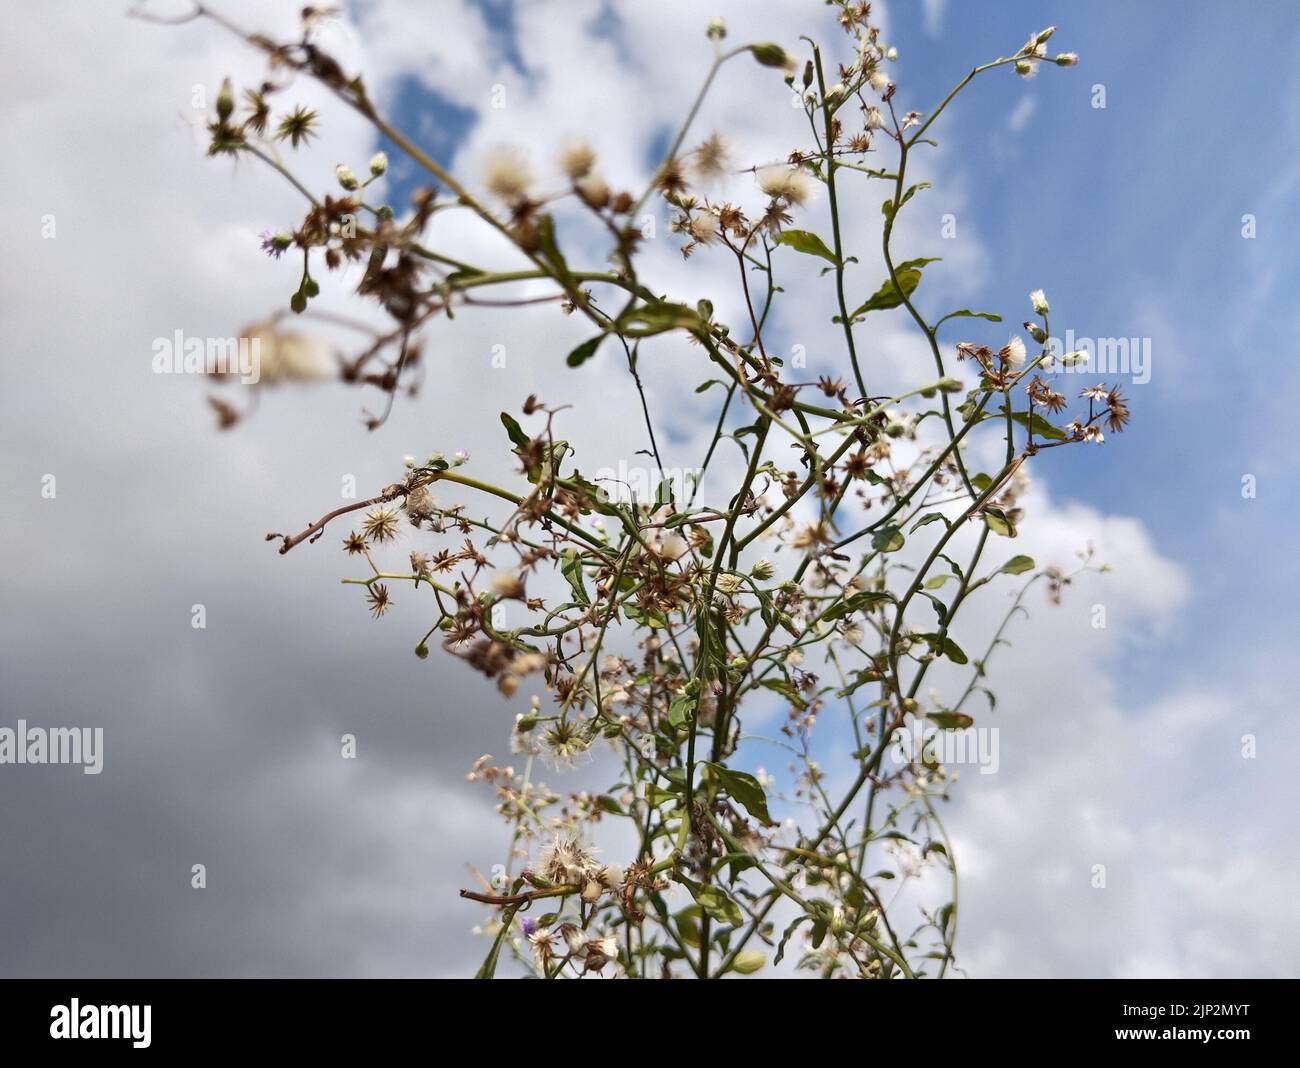 A closeup shot of thale cress plant against a background of cloudy sky Stock Photo